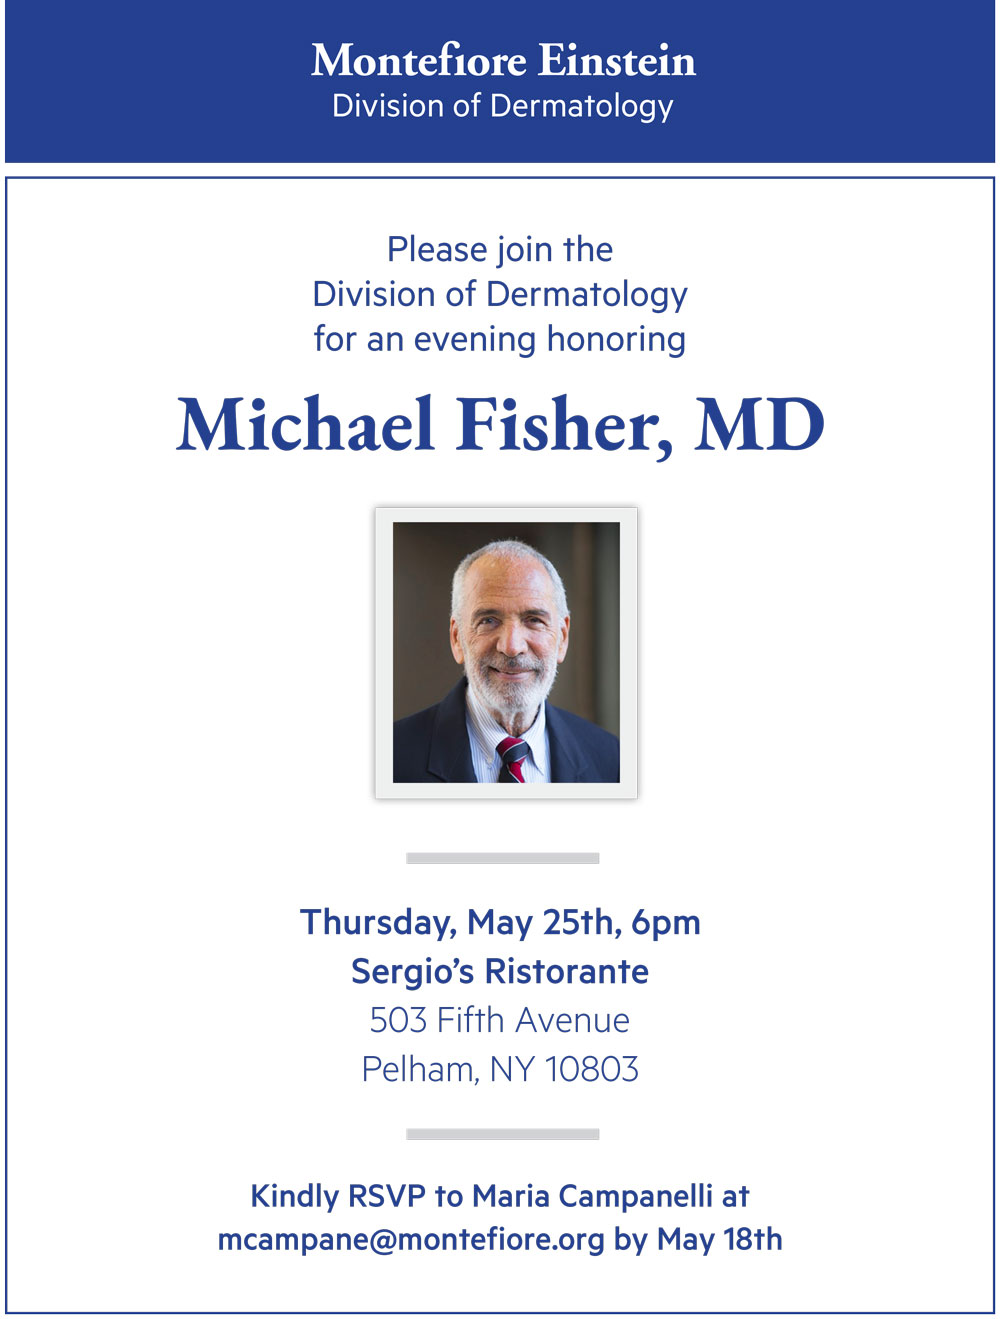 Dr. Michael Fisher